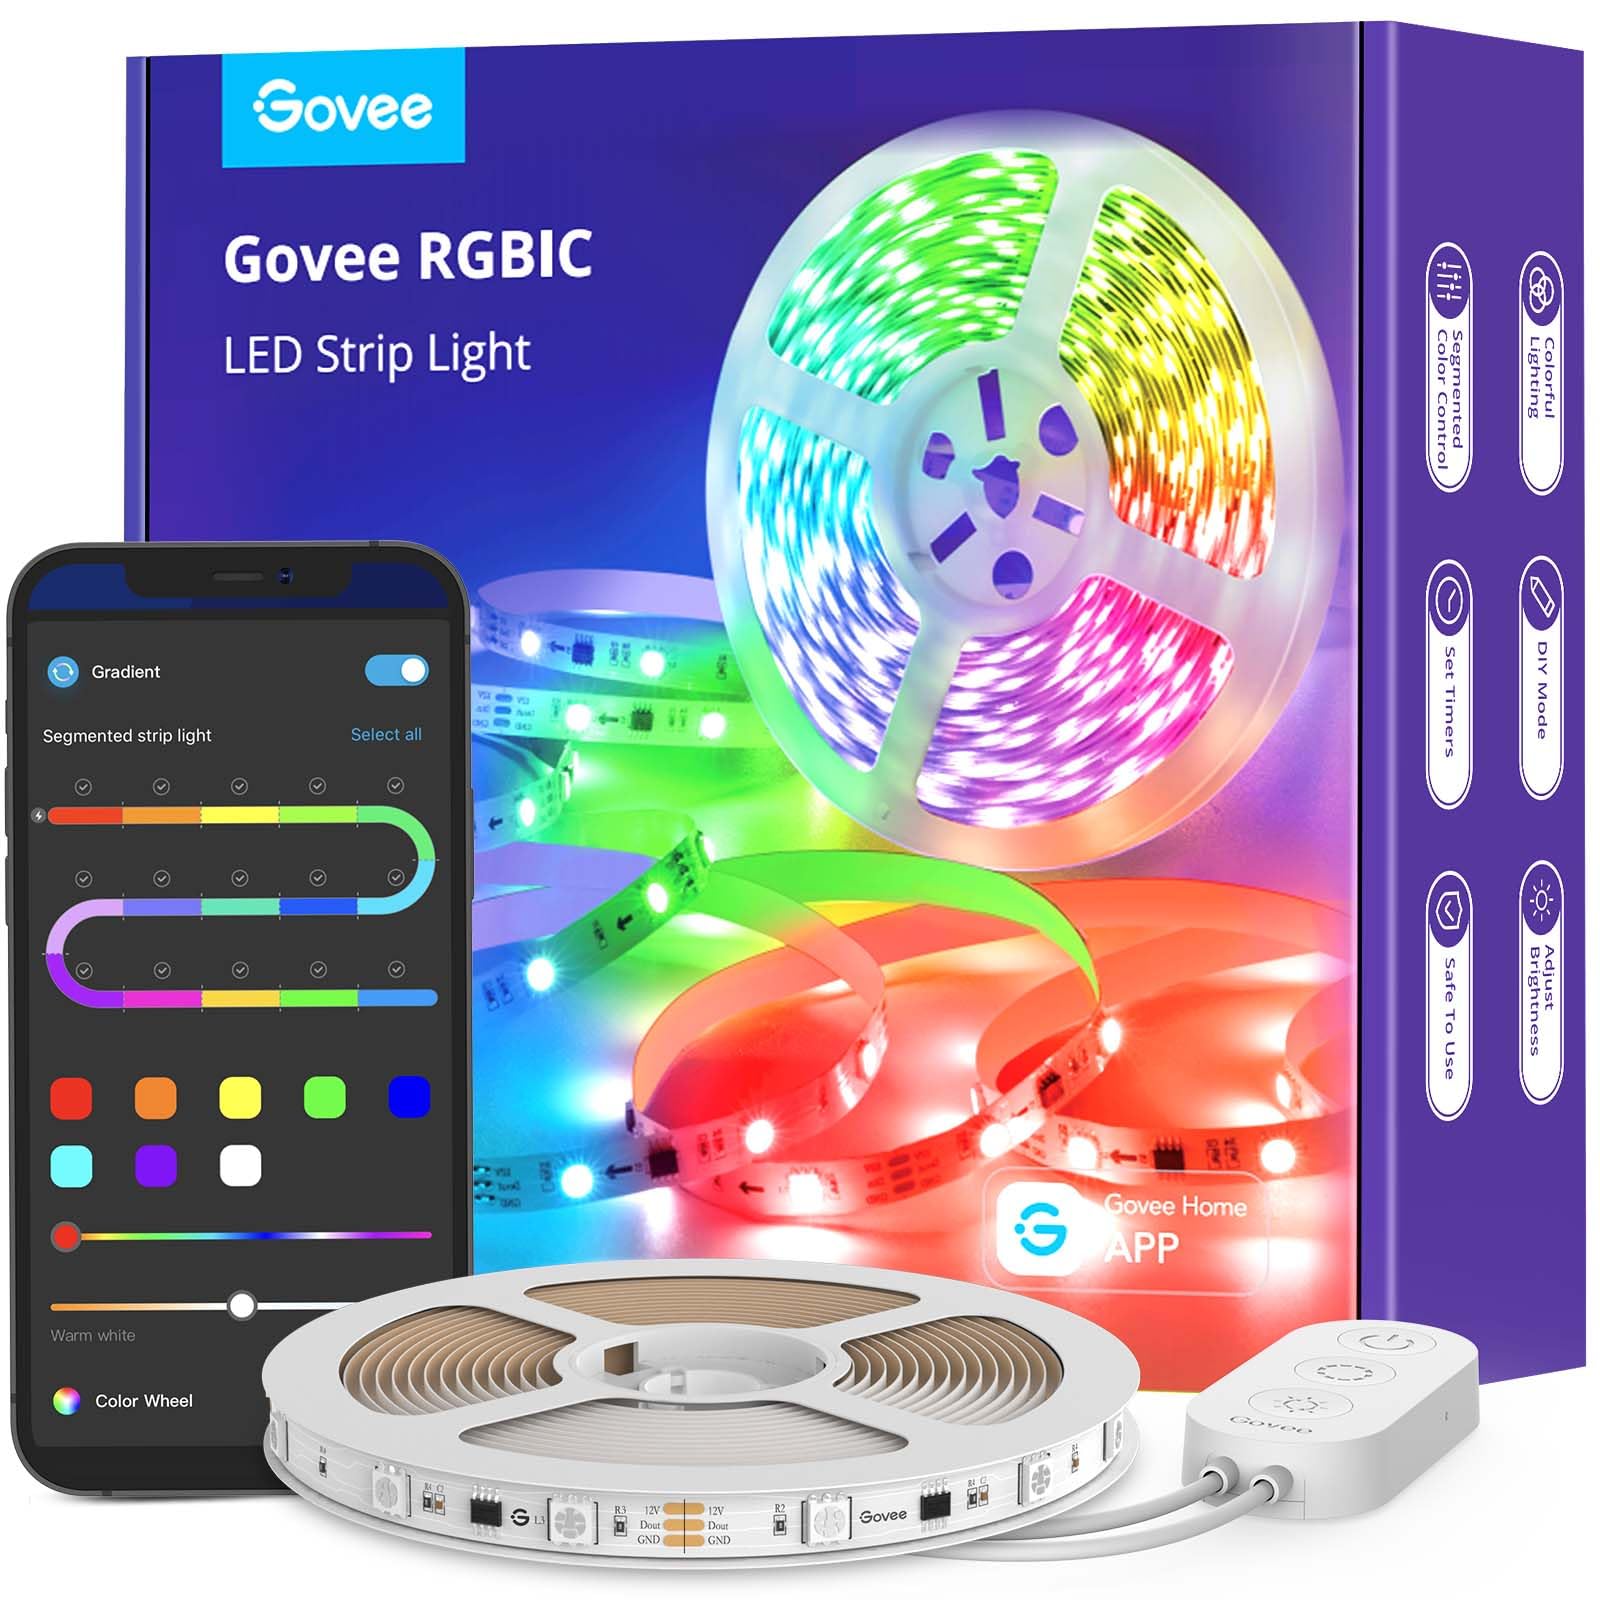 Govee LED Strip Lights RGBIC, 16.4ft Bluetooth Color Changing LED Lights with Segmented App Control, Smart LED Strip Color Picking, Music Sync LED Lights for Bedroom, Living Room, Party, Mother's Day